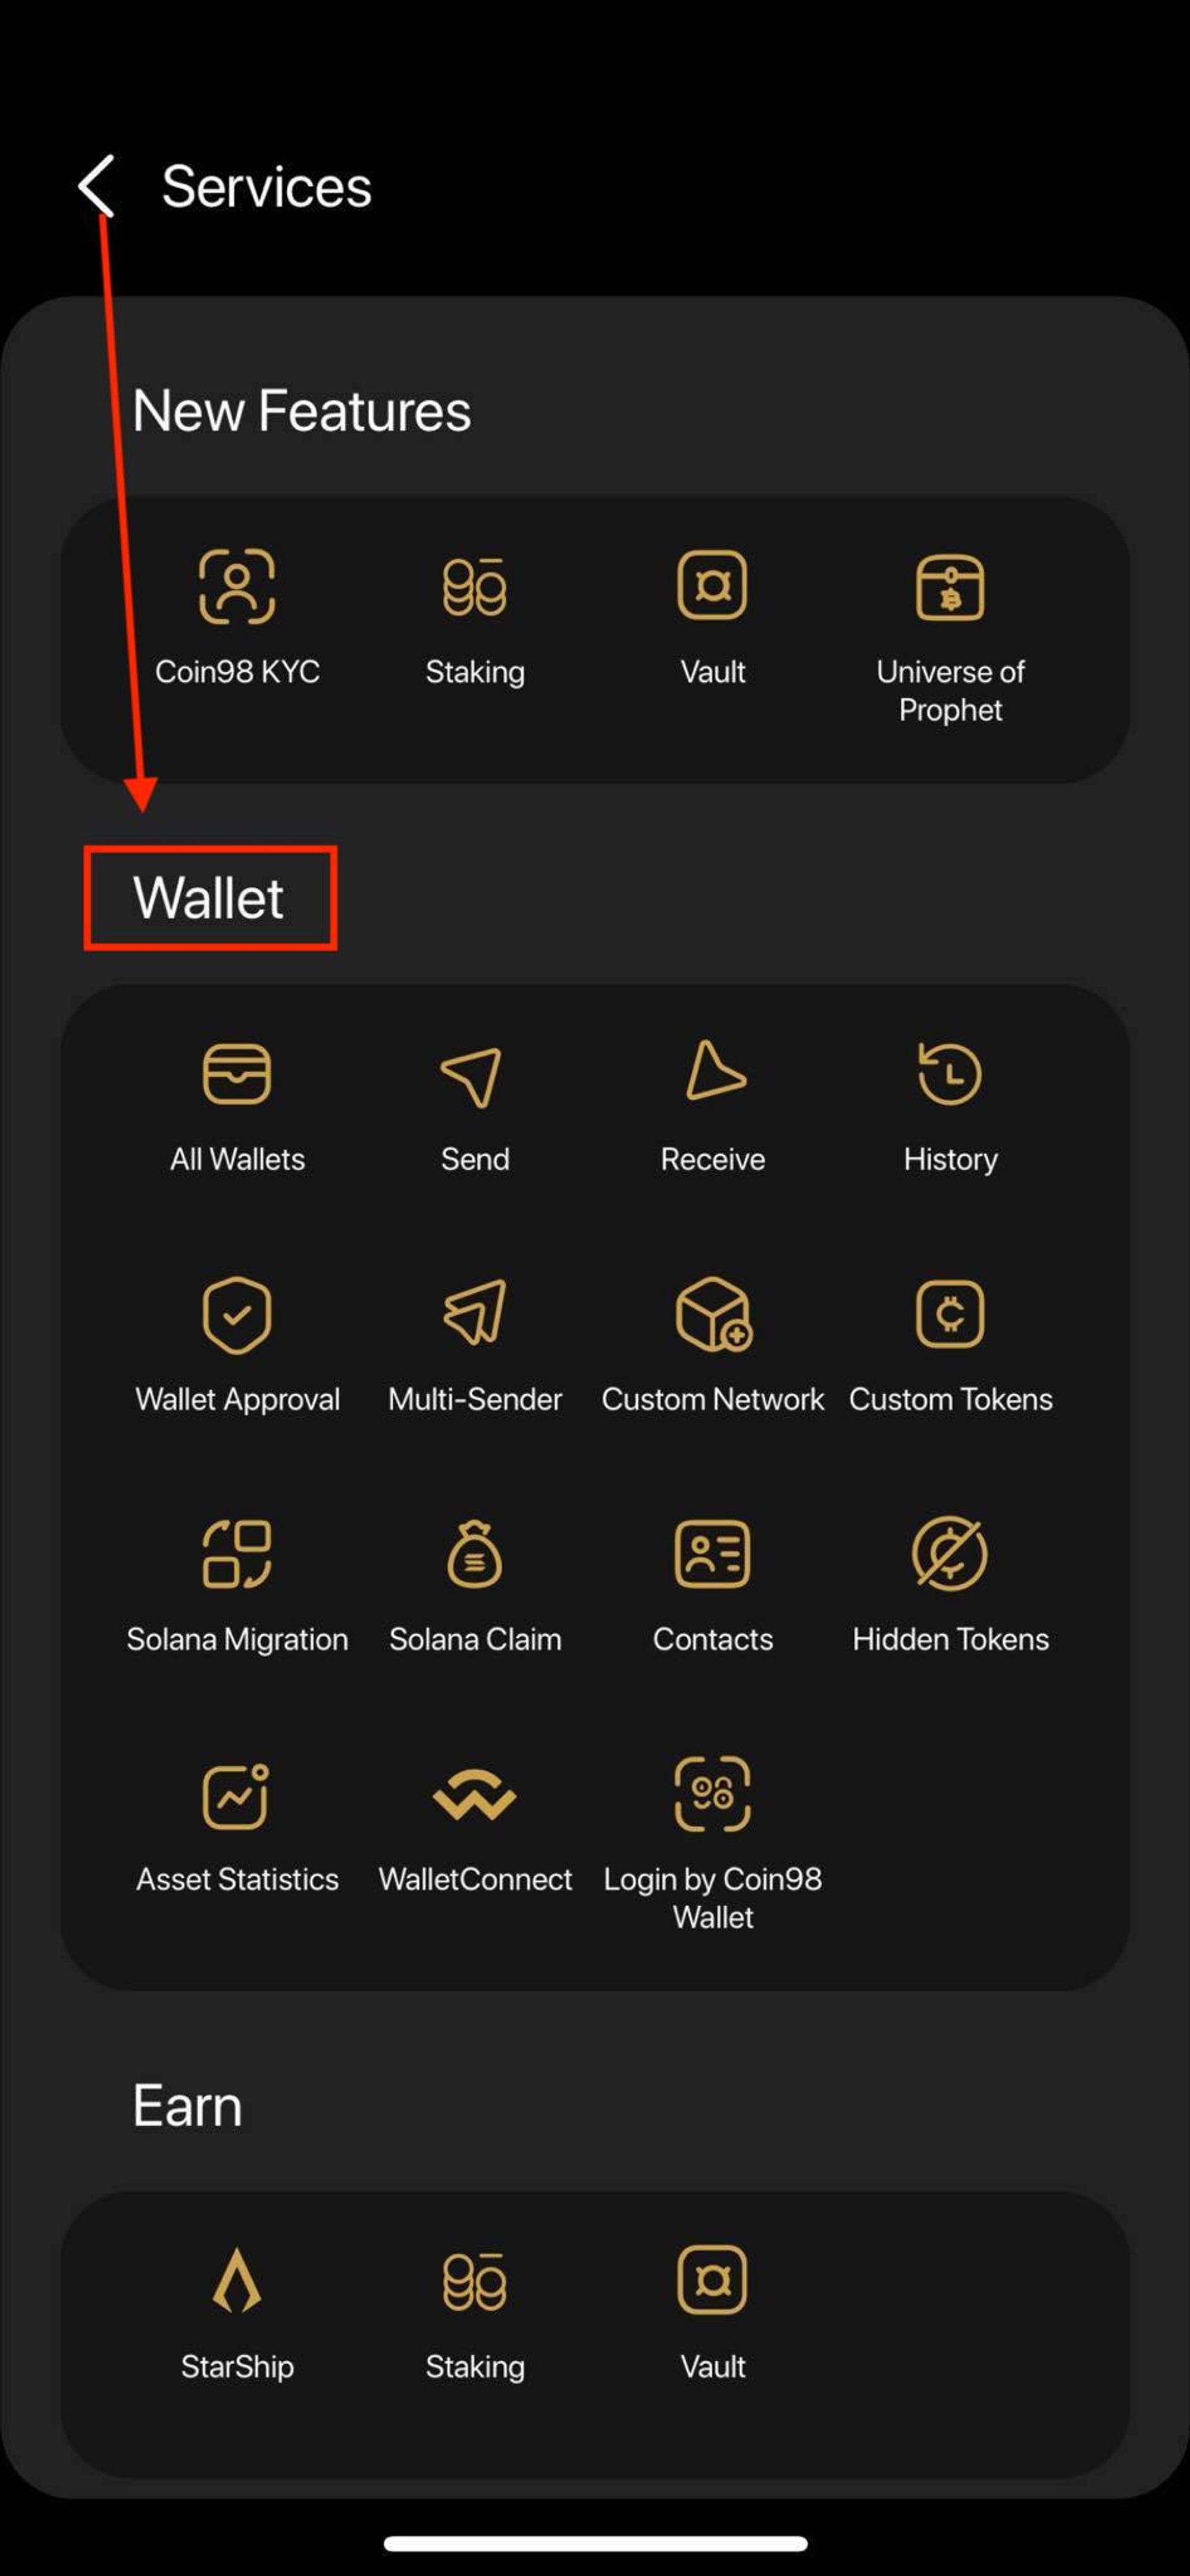 This image shows the location of the Solana Migration button in the Coin98  Wallet. 